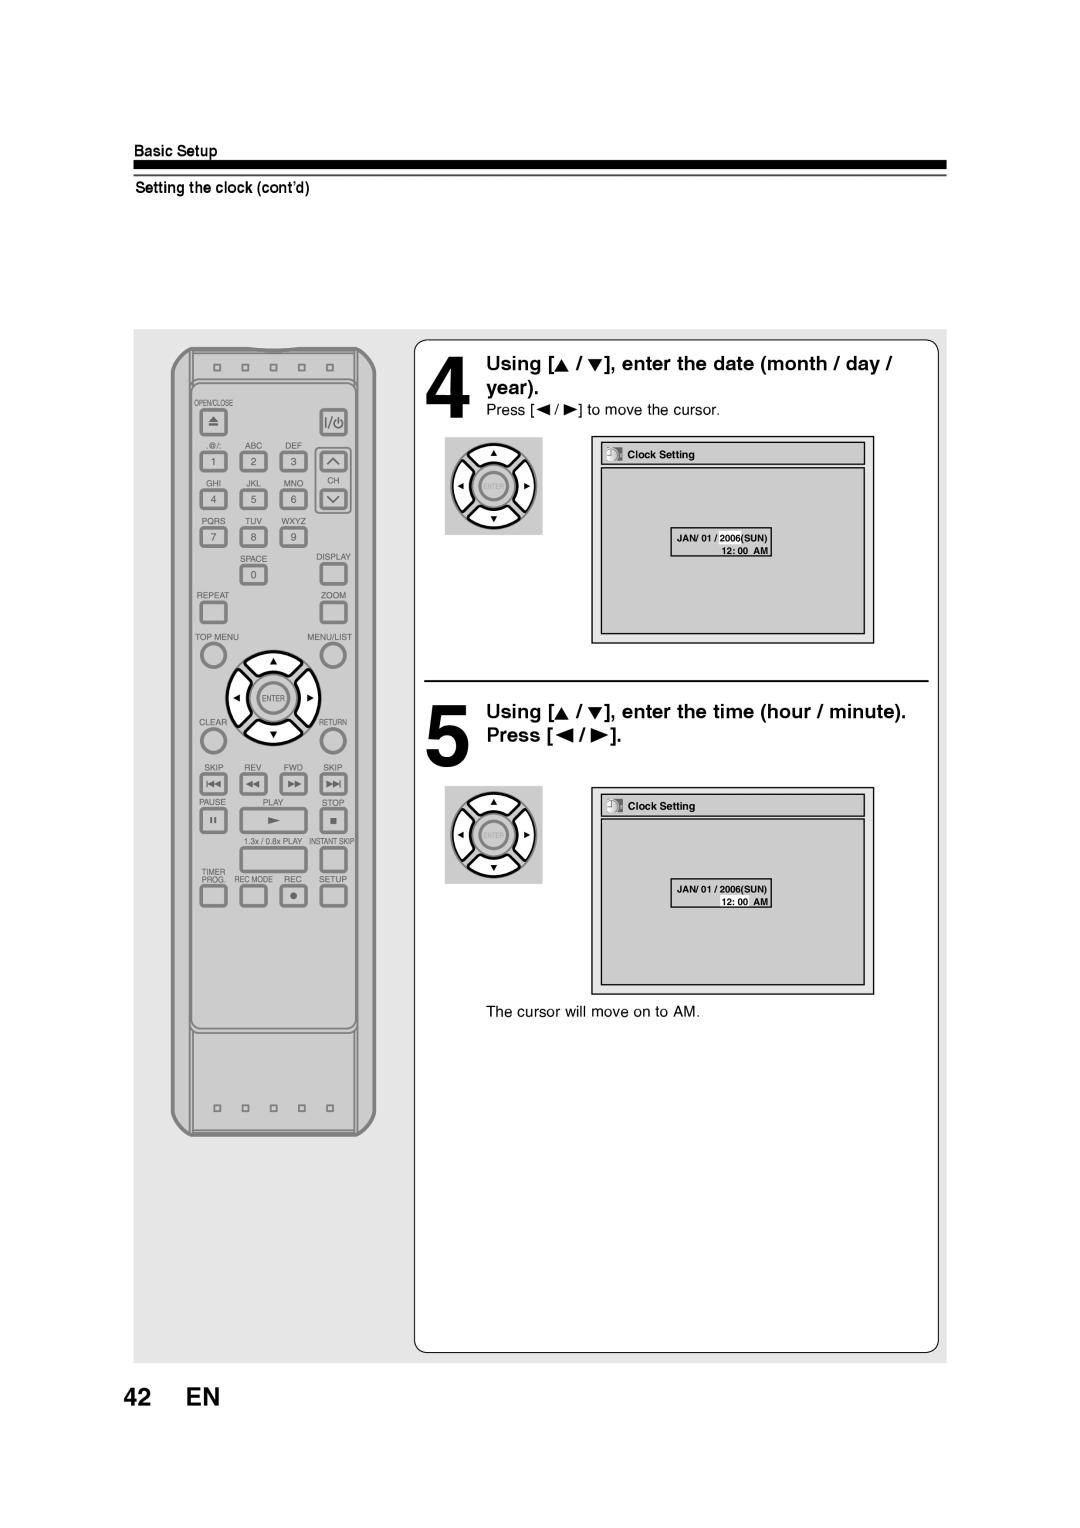 Toshiba D-RW2SU/D-RW2SC manual 42 EN, Using K / L, enter the date month / day / year, Basic Setup Setting the clock cont’d 